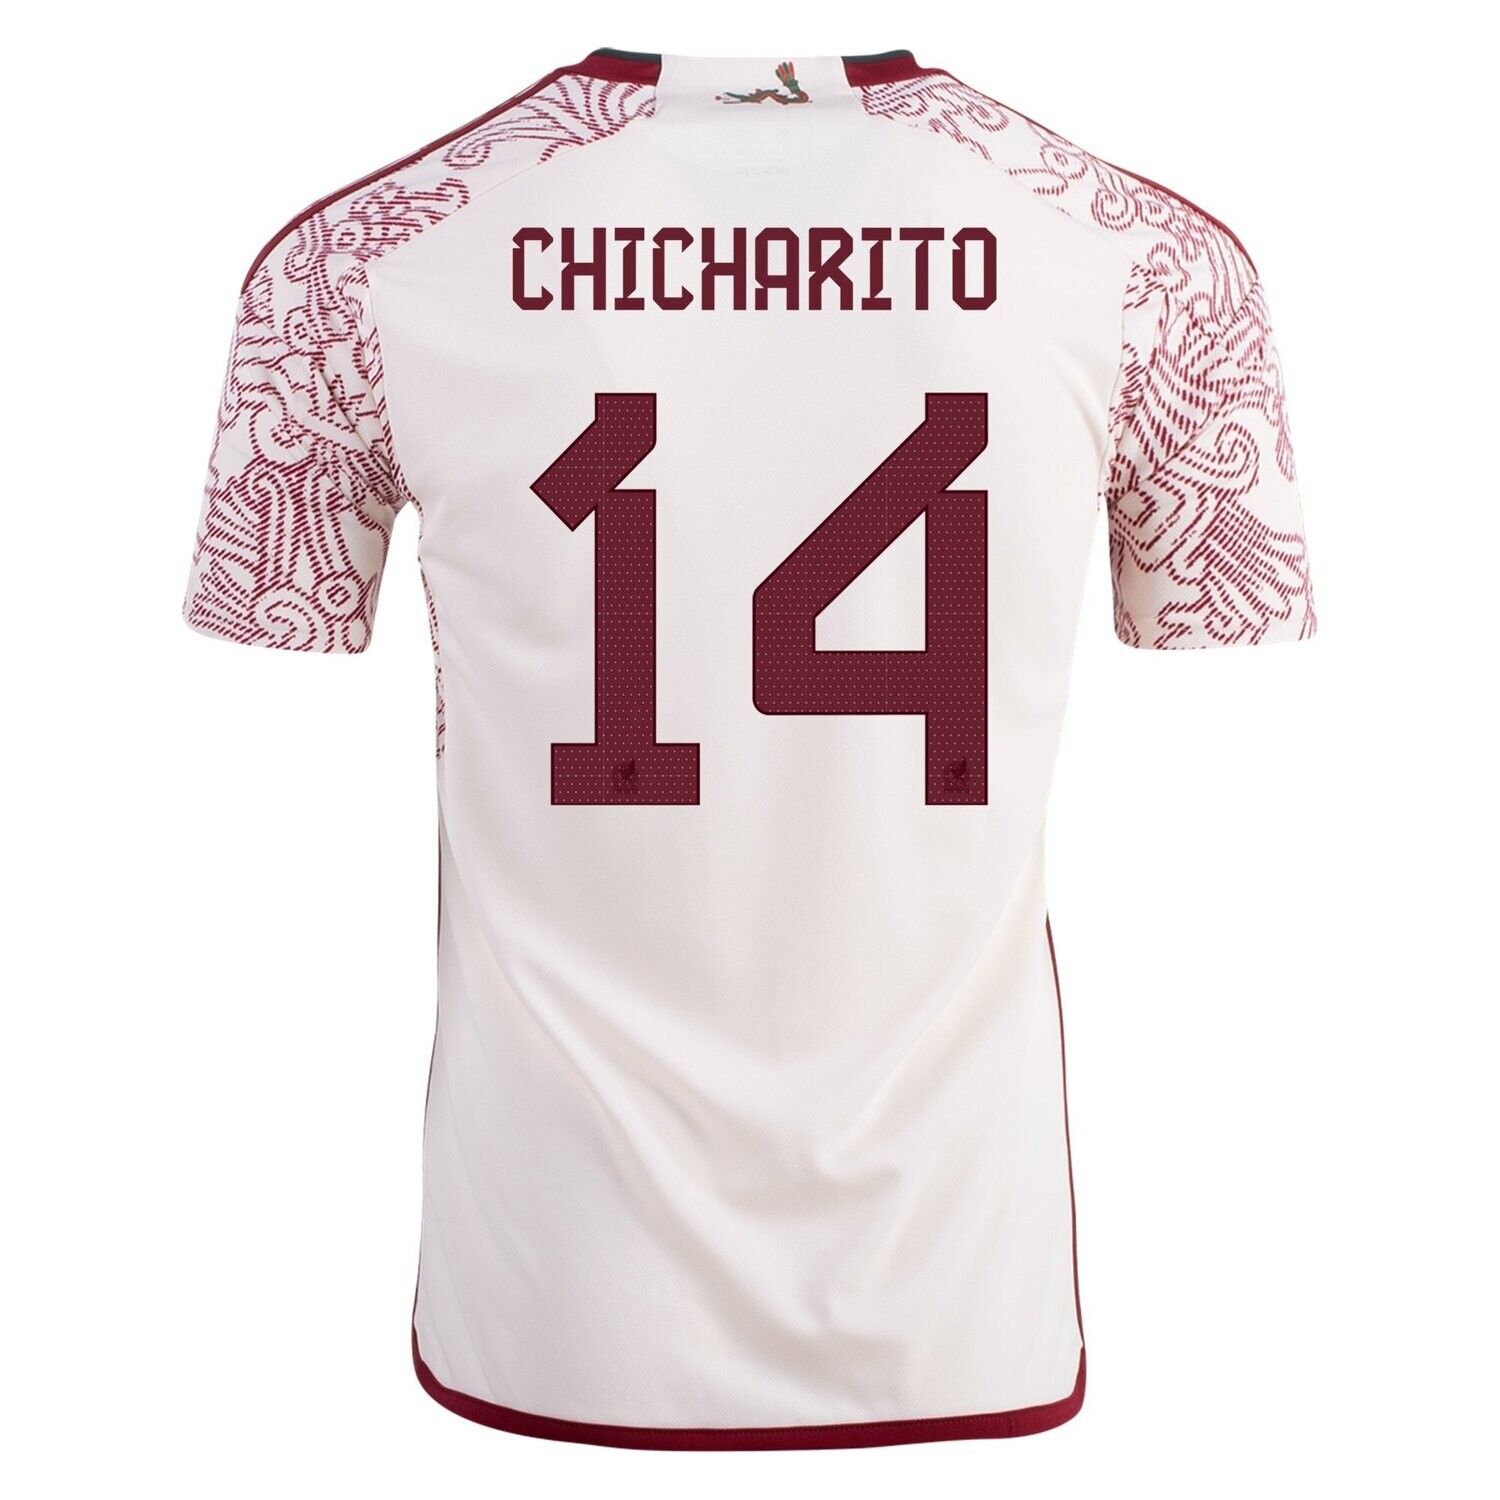 Chicharito Mexico Soccer Jersey Away for 2022 World Cup